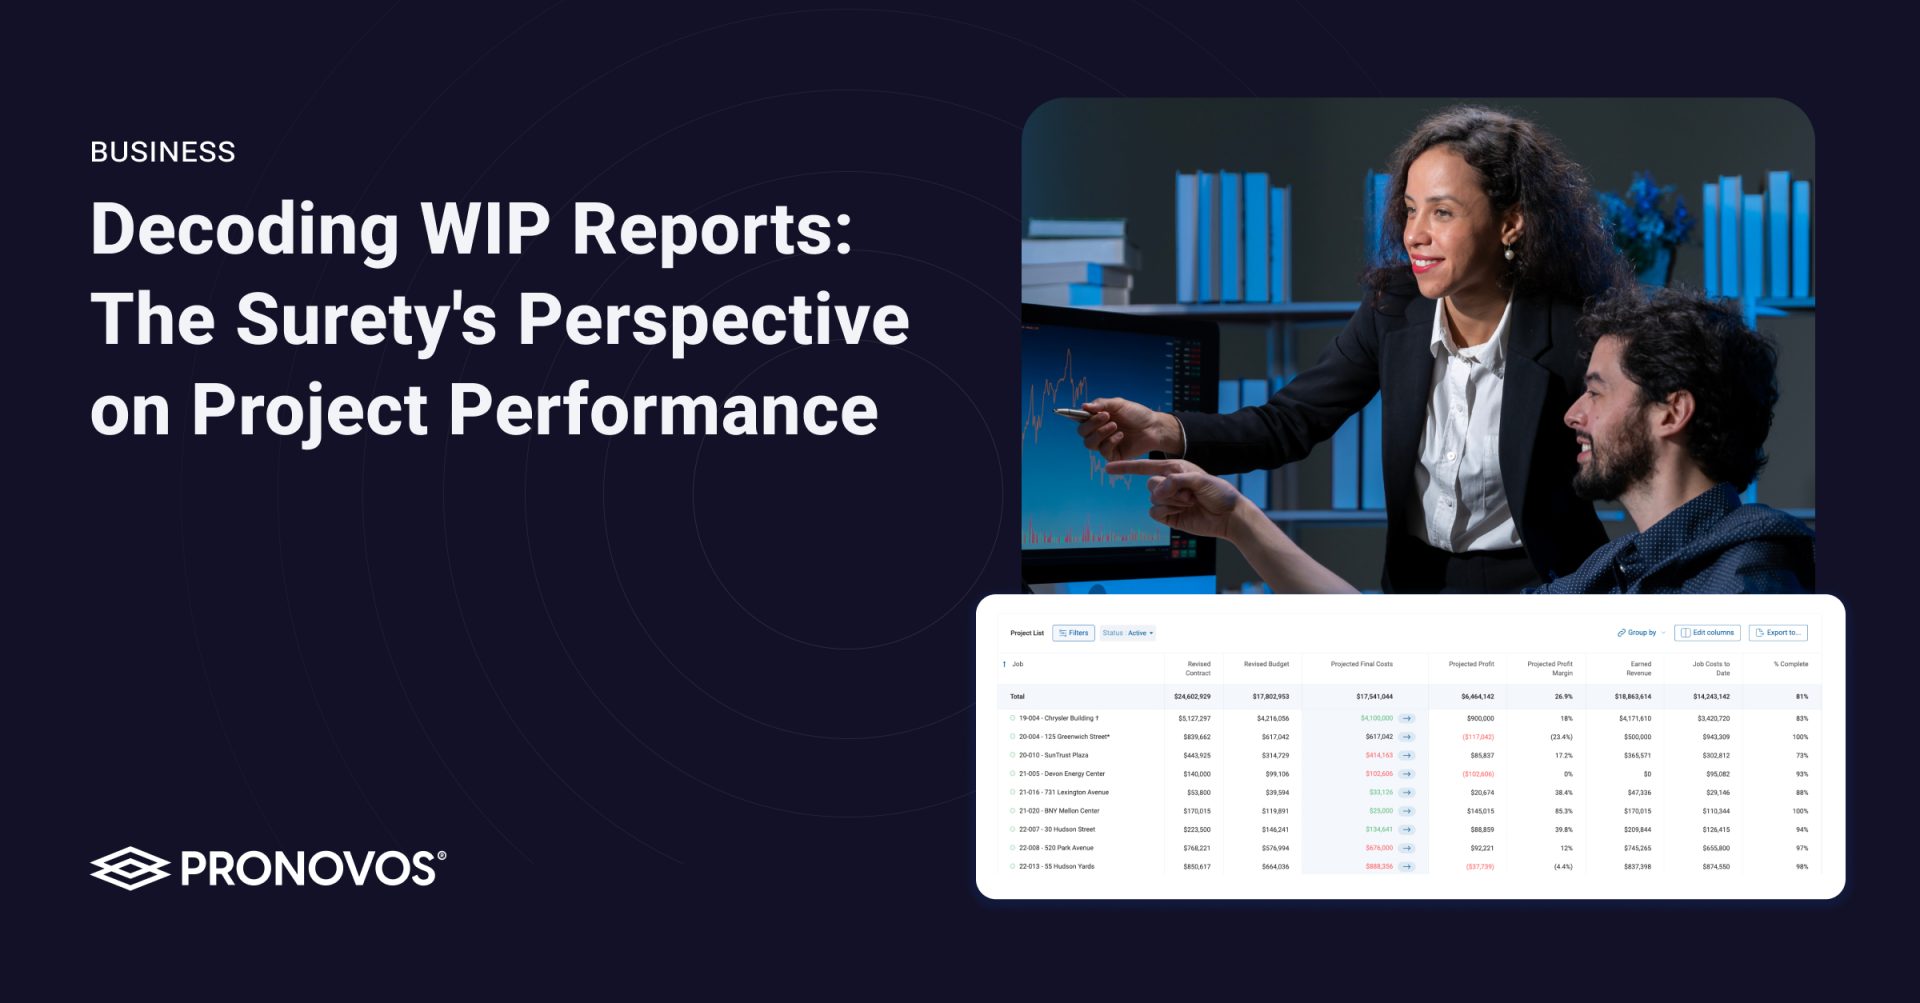 Decoding WIP Reports: The Surety's Perspective on Project Performance